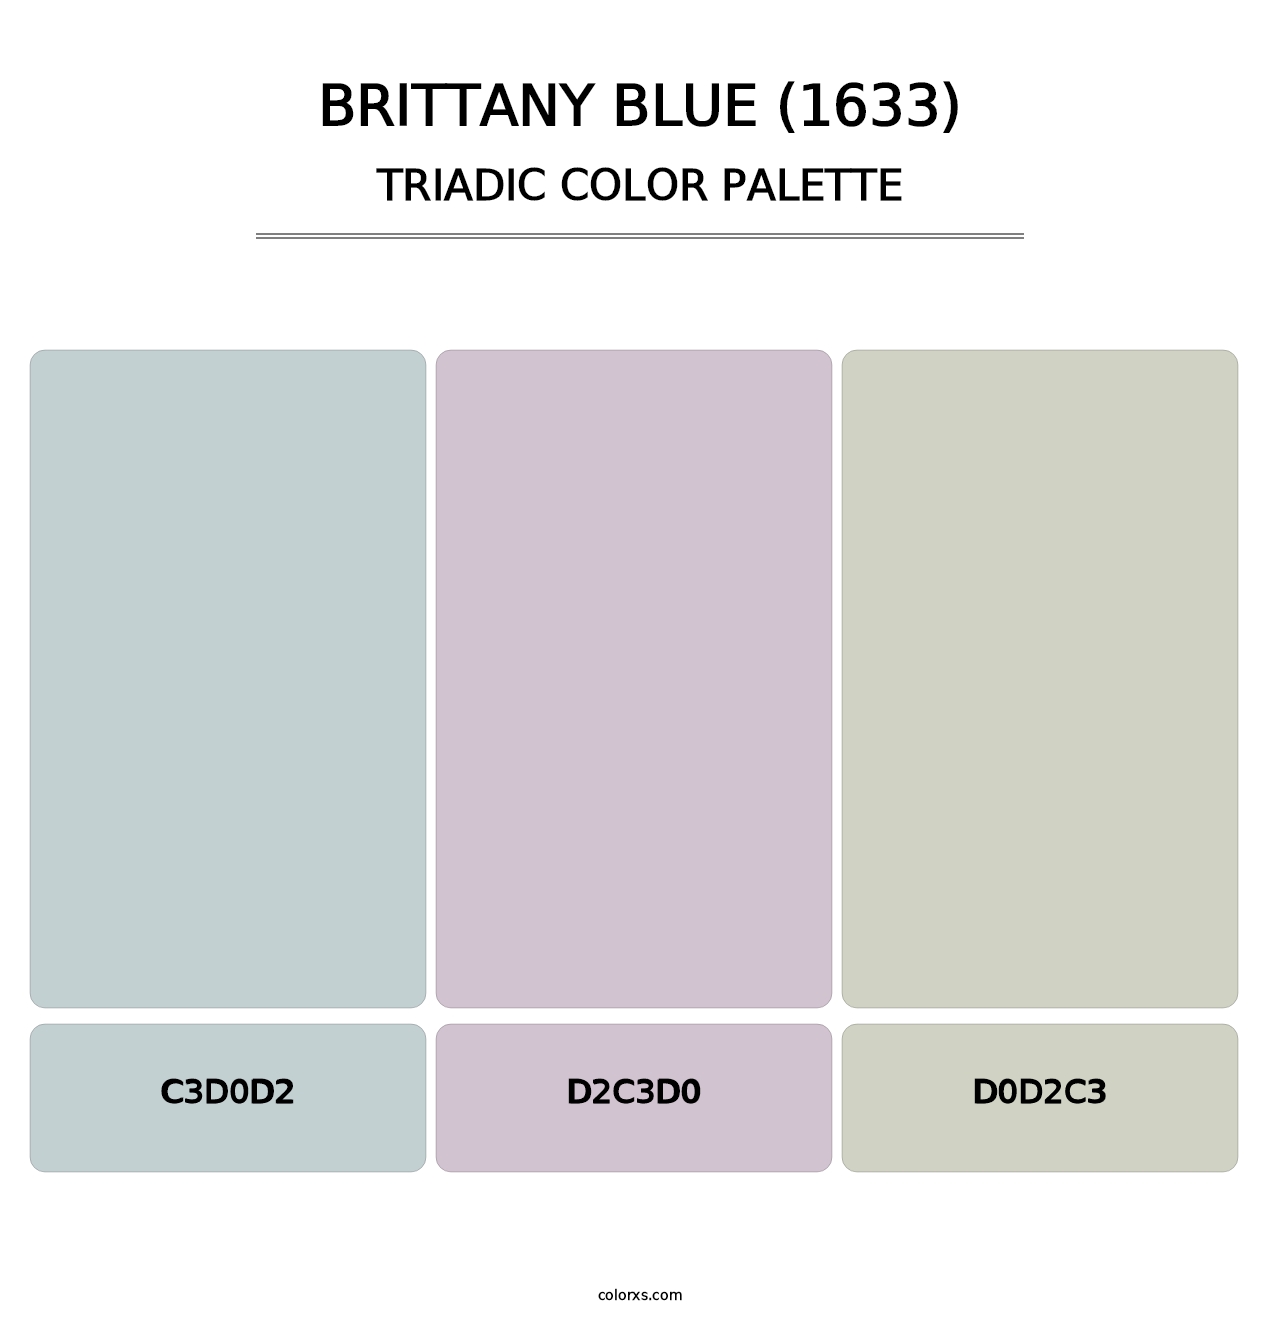 Brittany Blue (1633) - Triadic Color Palette